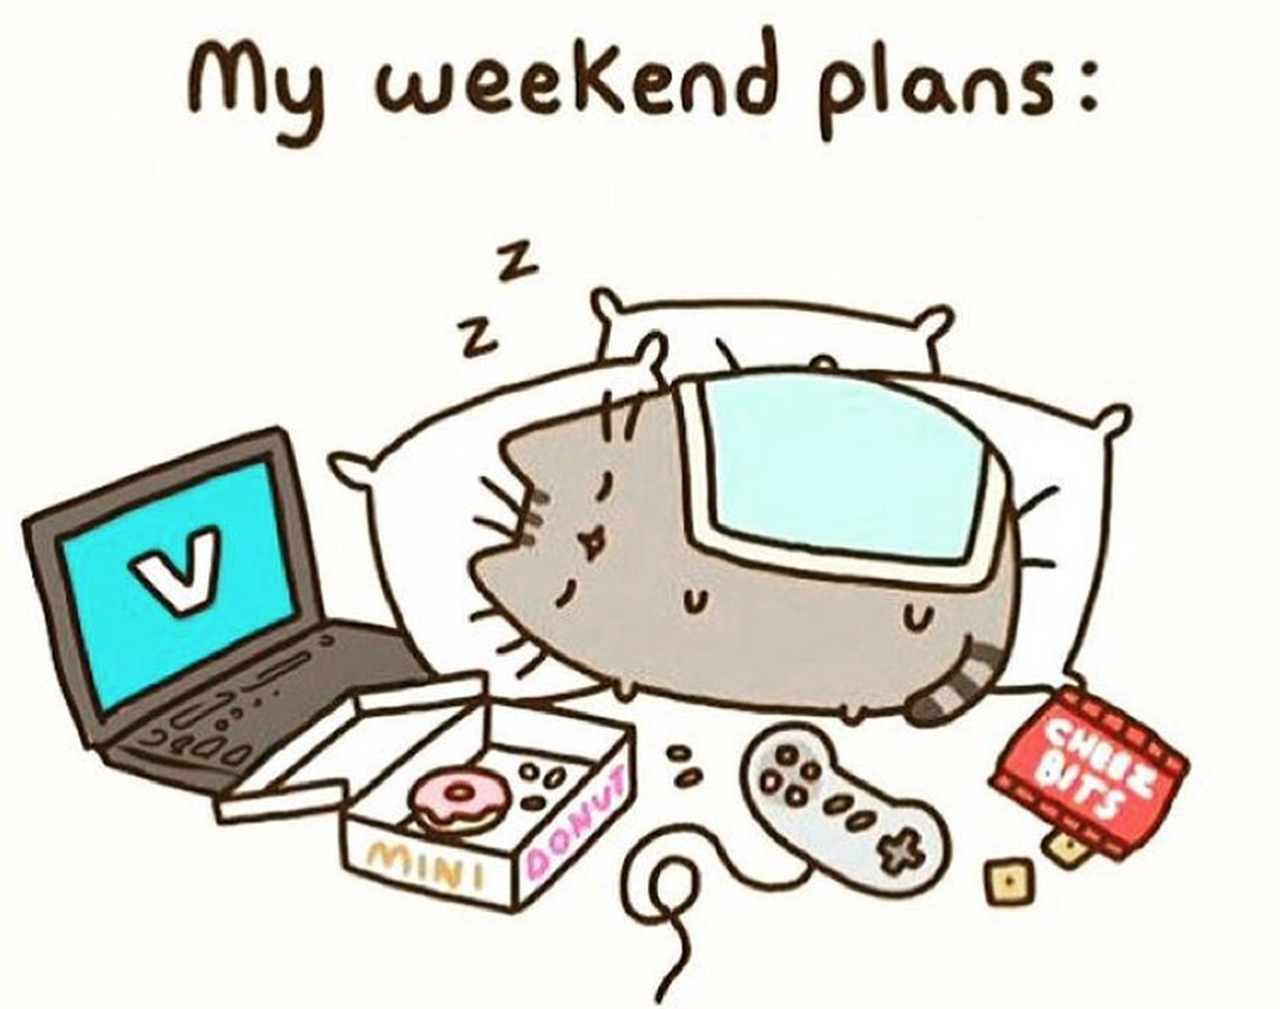 How you spending weekend. My Plans for the weekend. Plans for the weekend. My weekend презентация. Weekends картинки.